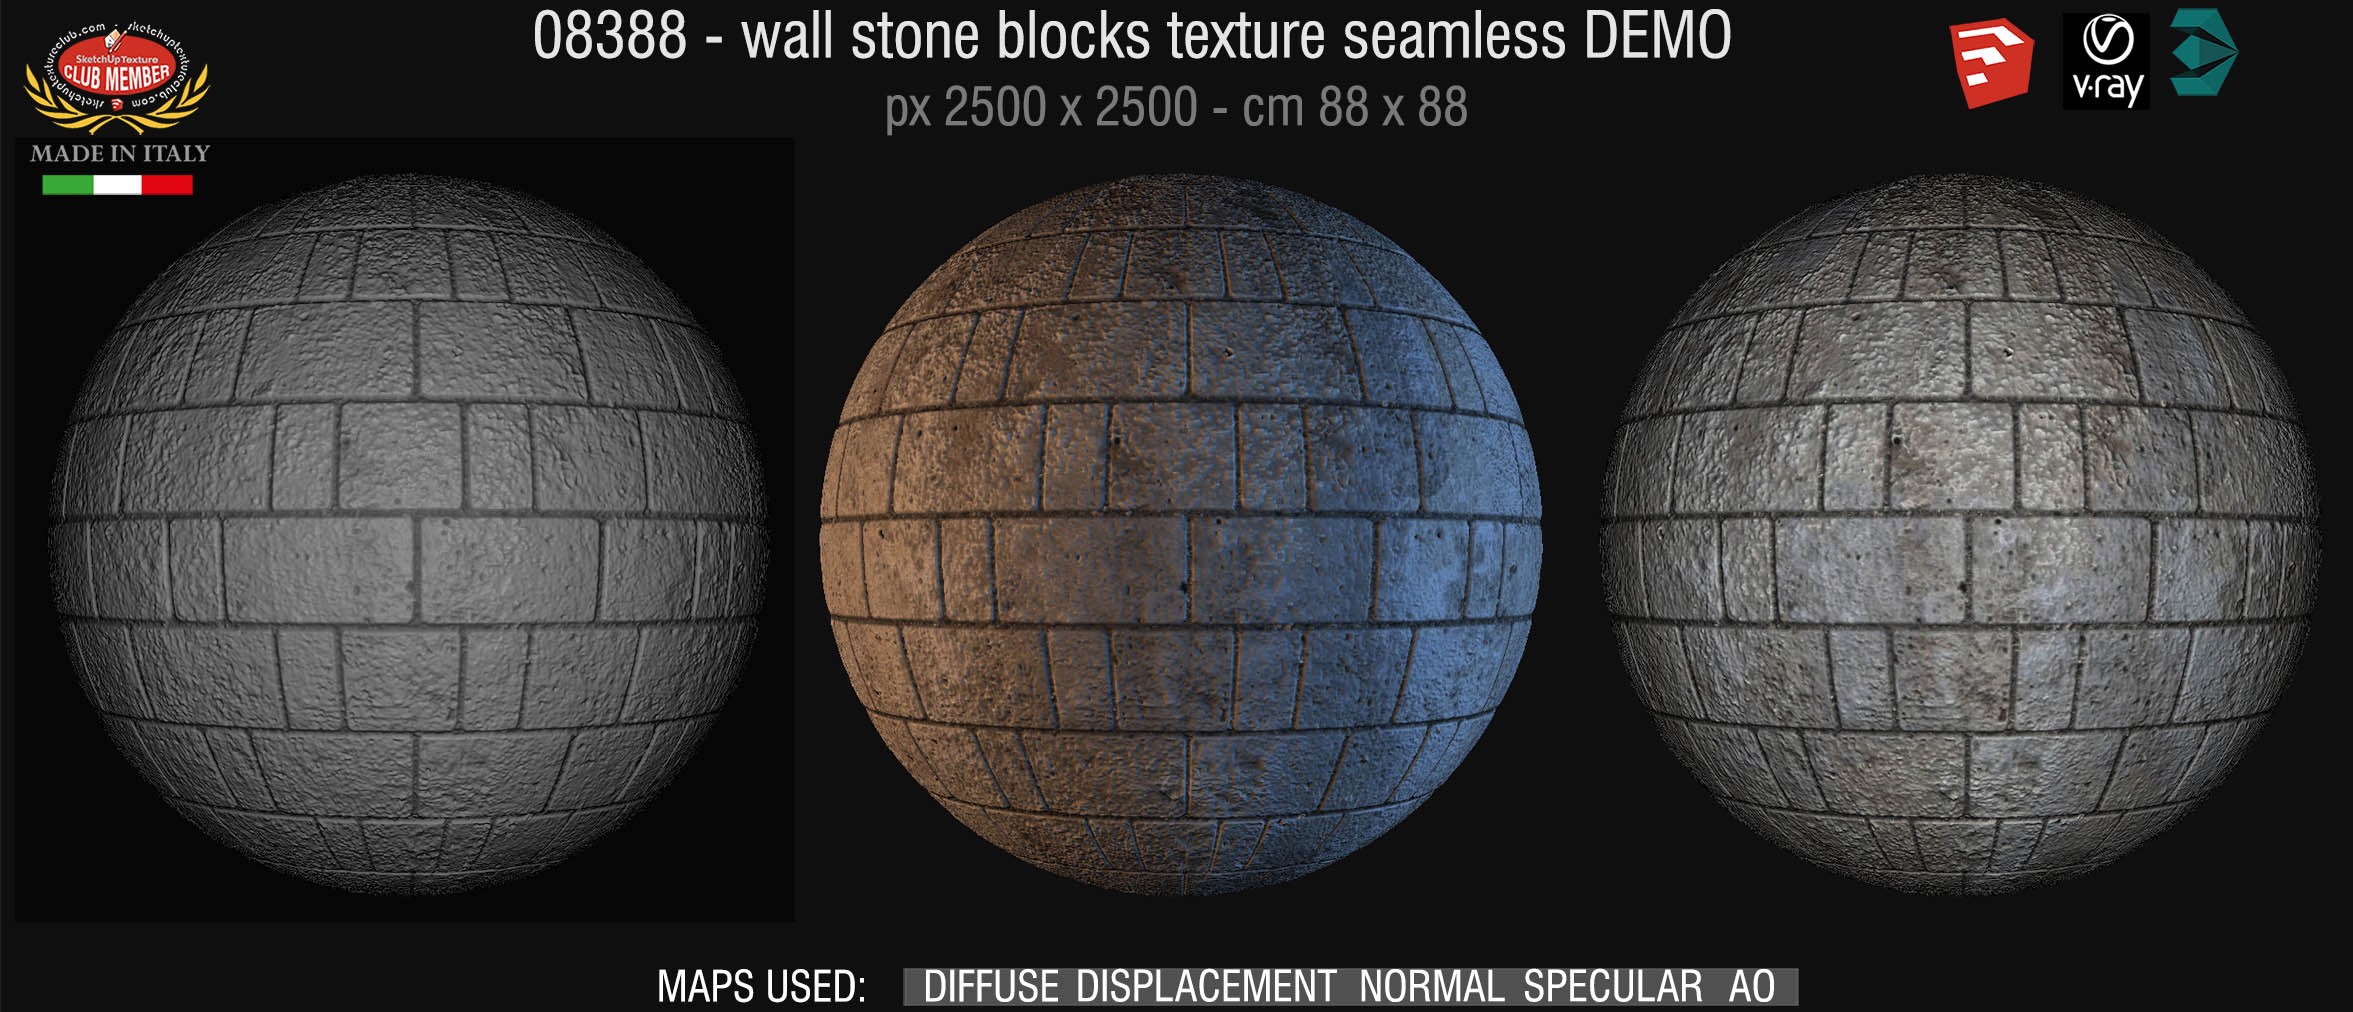 08388 HR Wall stone with regular blocks texture + maps DEMO